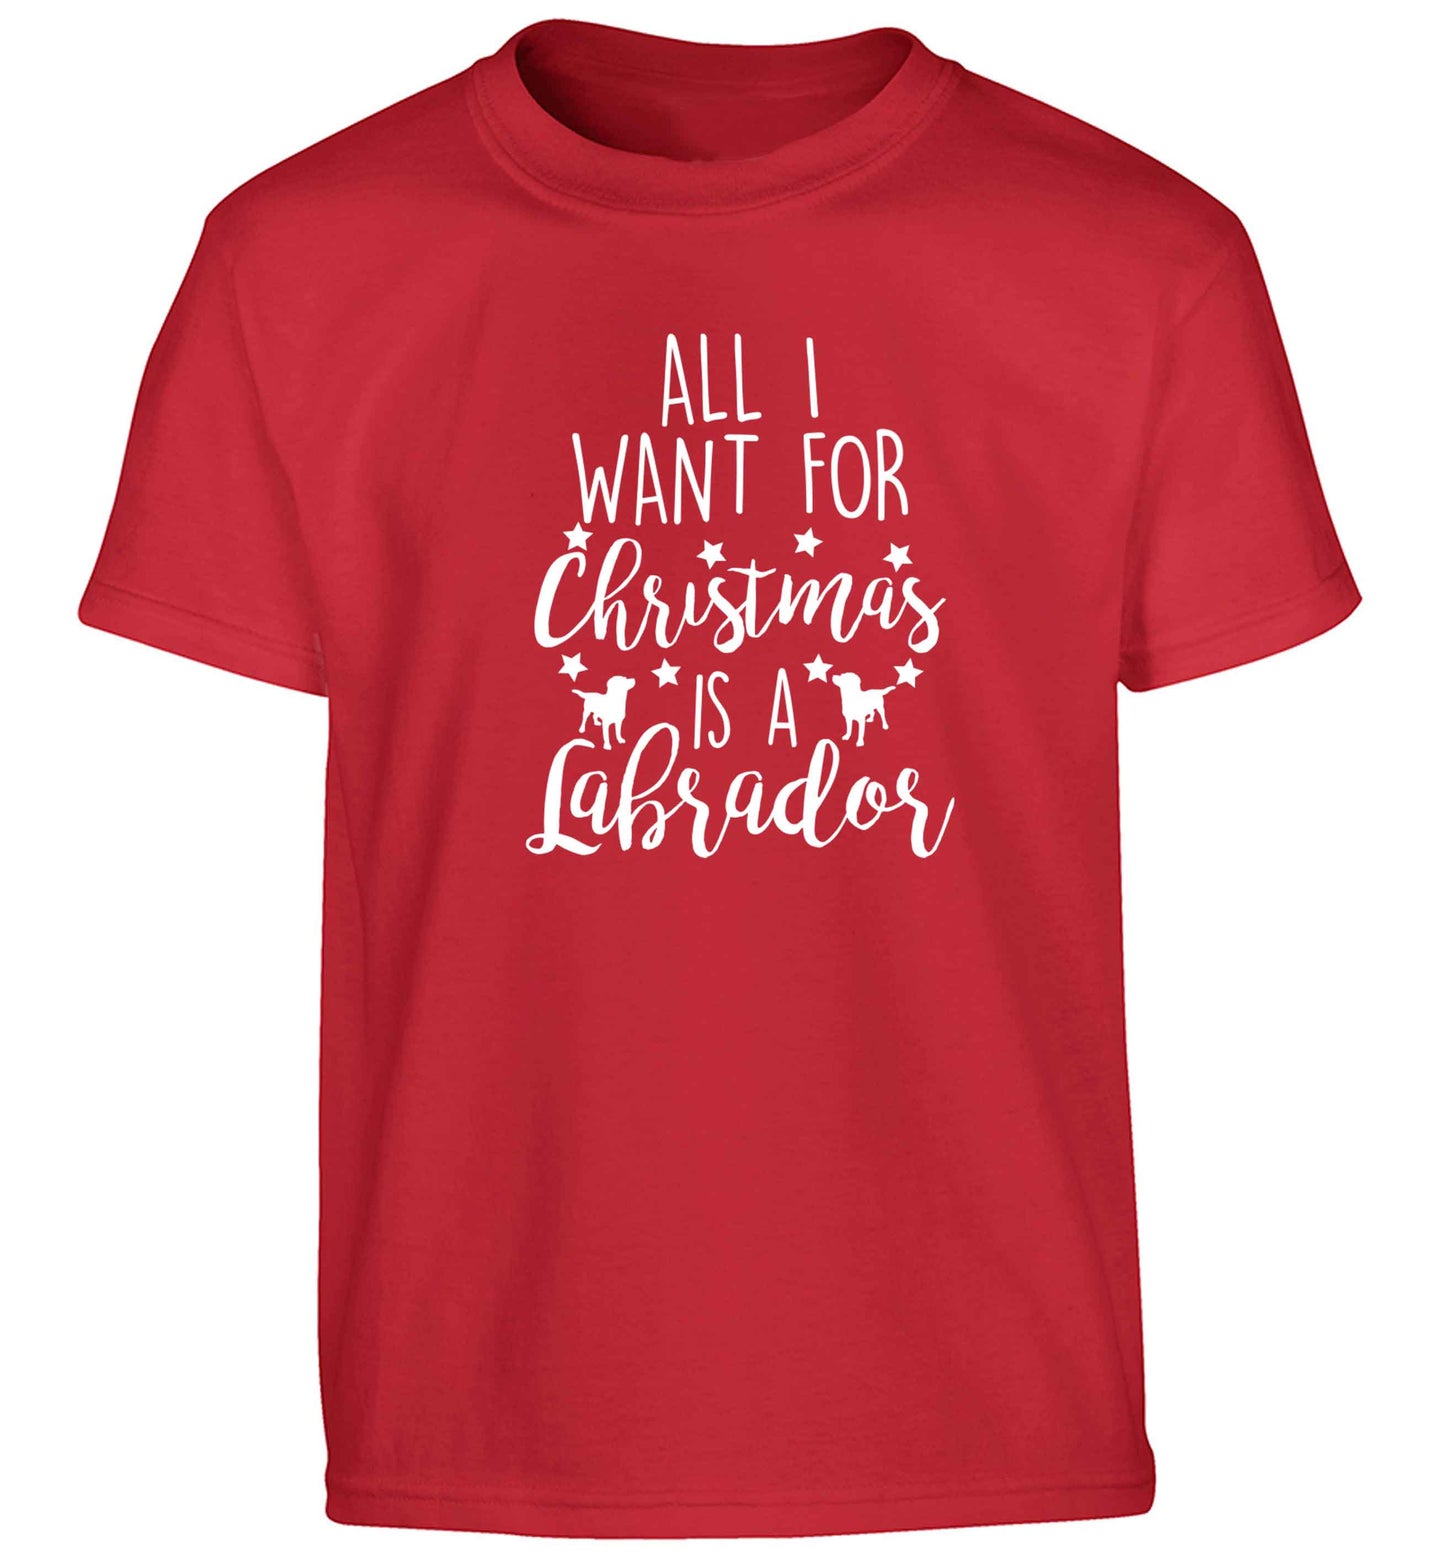 All I want for Christmas is a labrador Children's red Tshirt 12-13 Years